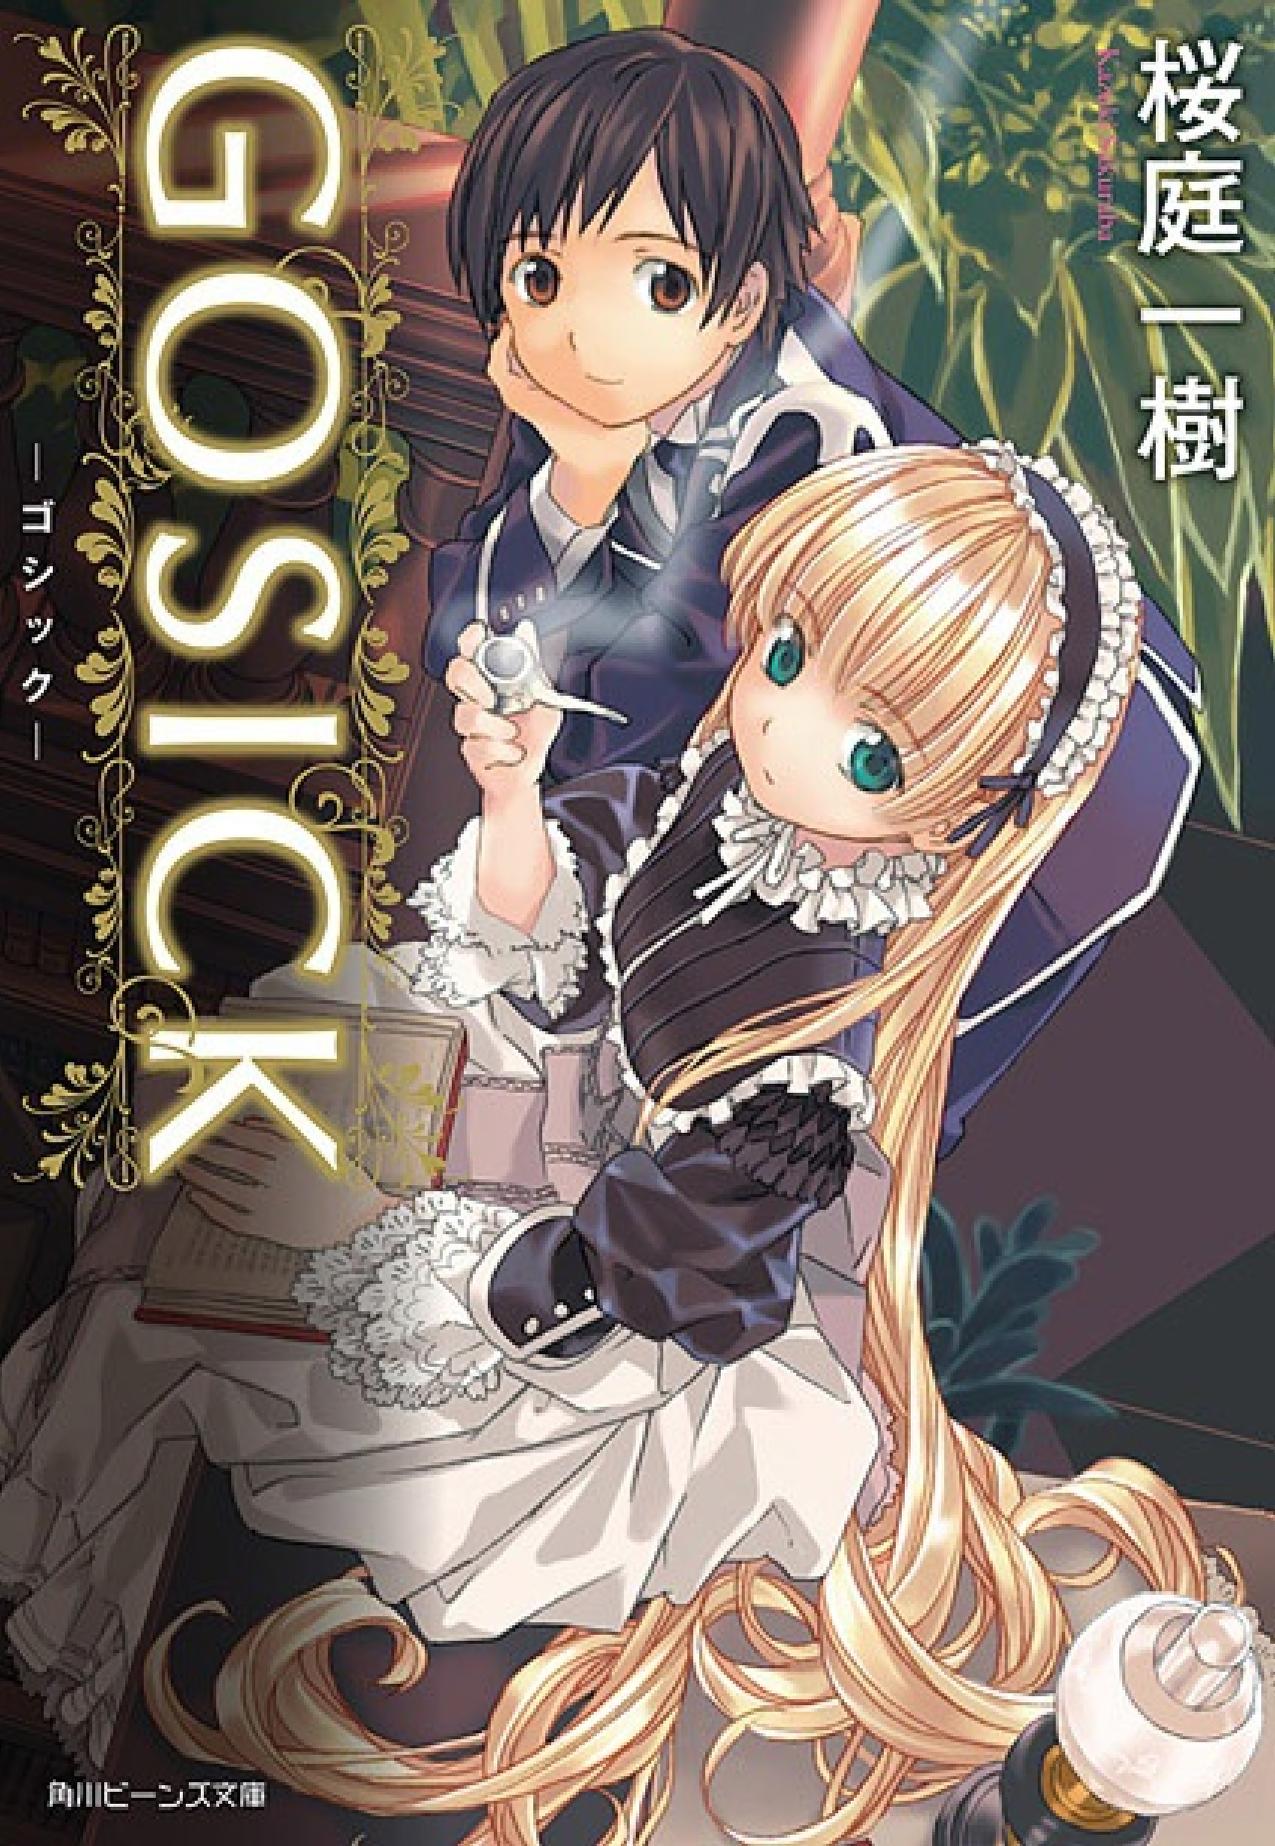 NOVEL: Gosick : Free Download, Borrow, and Streaming : Internet Archive